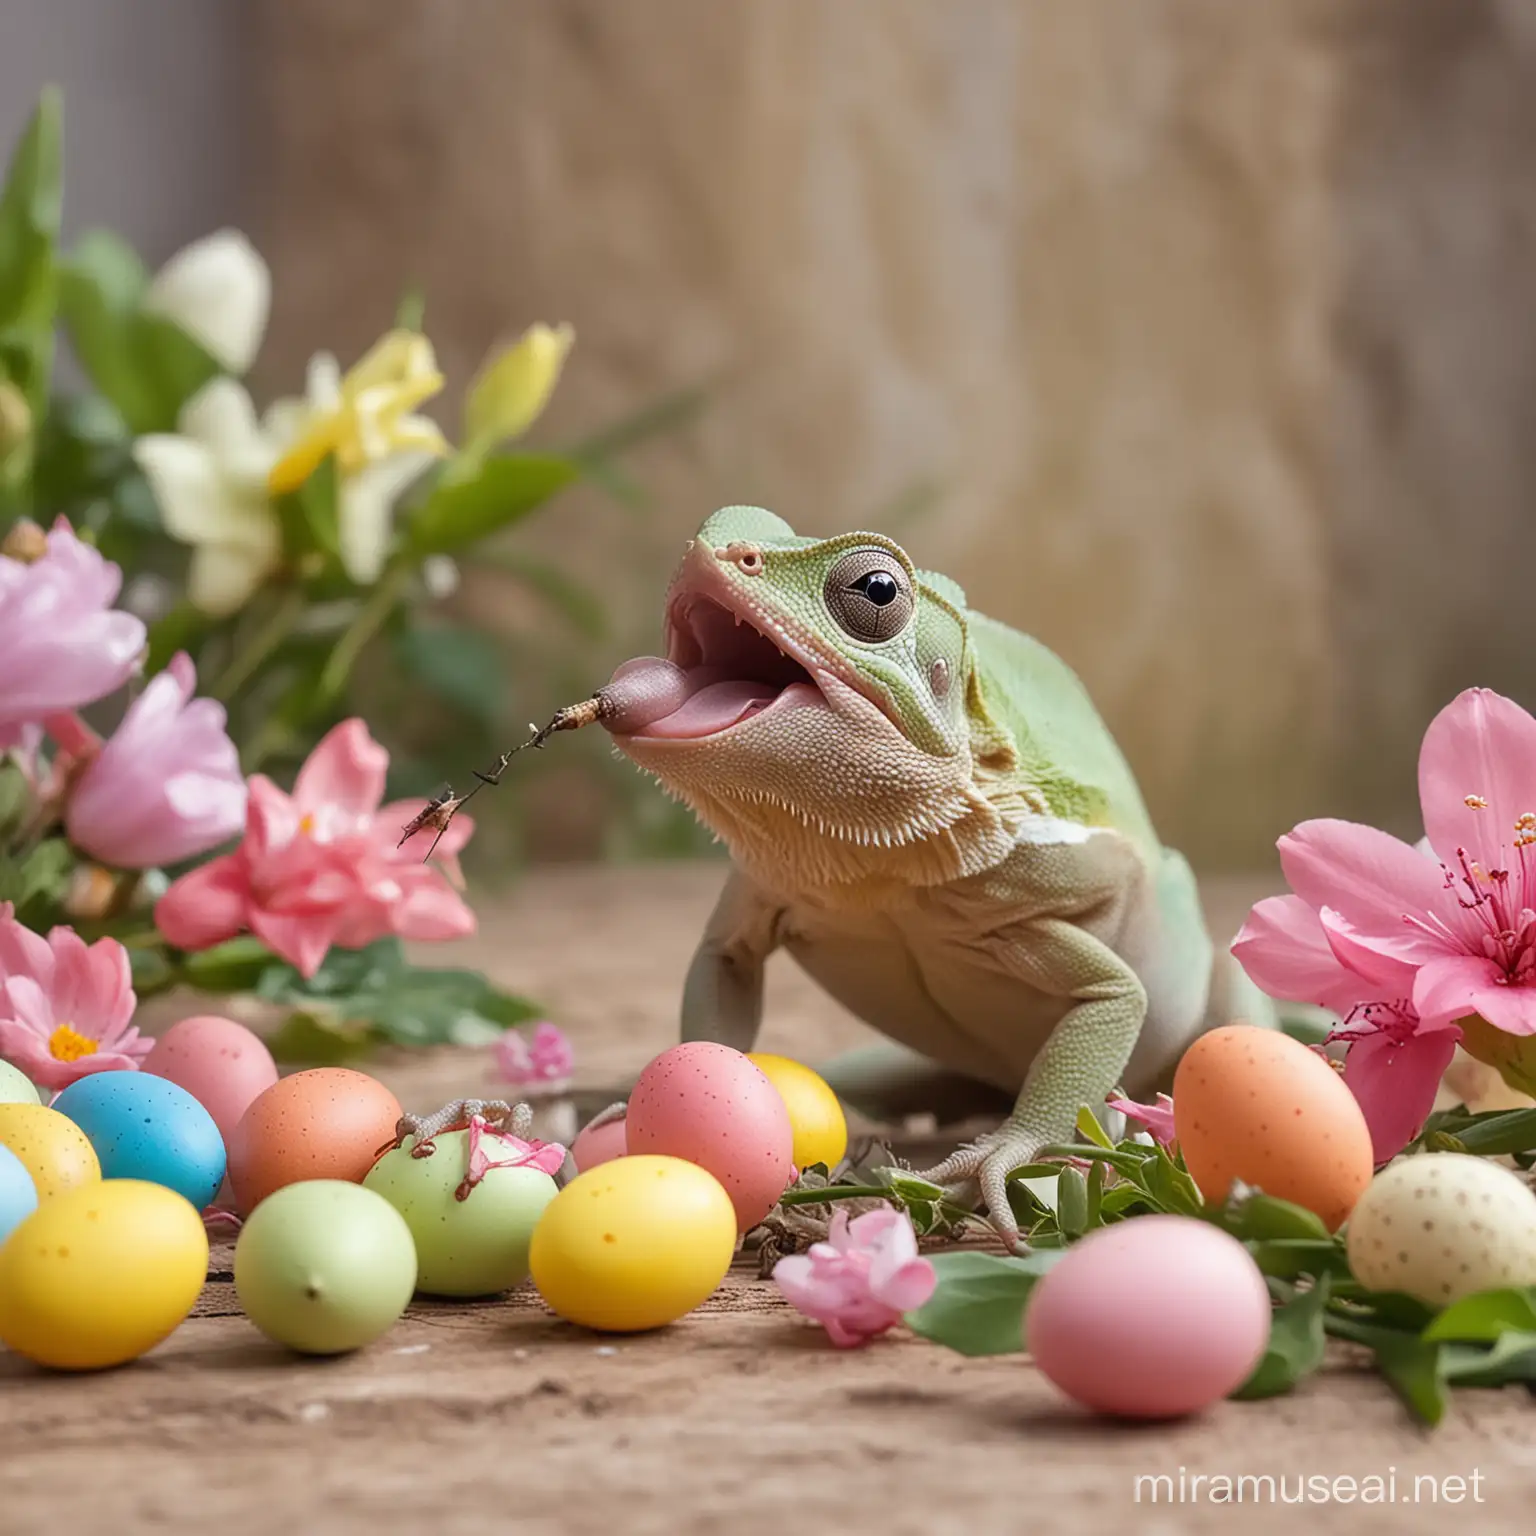 tongue cameleon catching a fly, easter eggs in the background and spring flowers